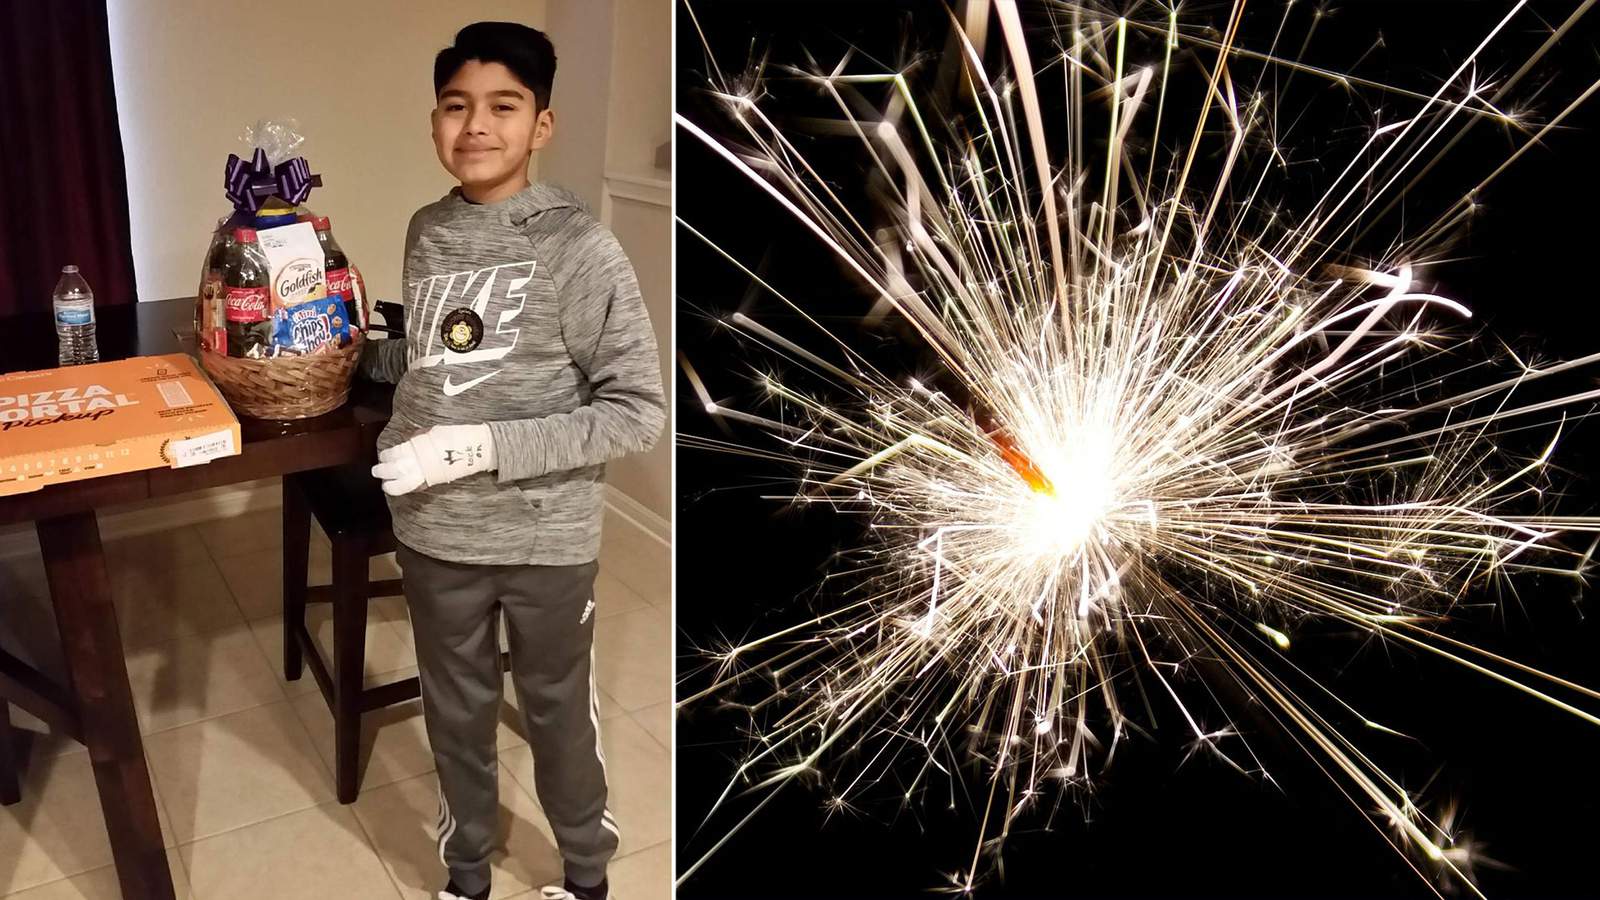 San Antonio teen injured when sparklers ‘exploded’ in his hand warns others about dangers of fireworks